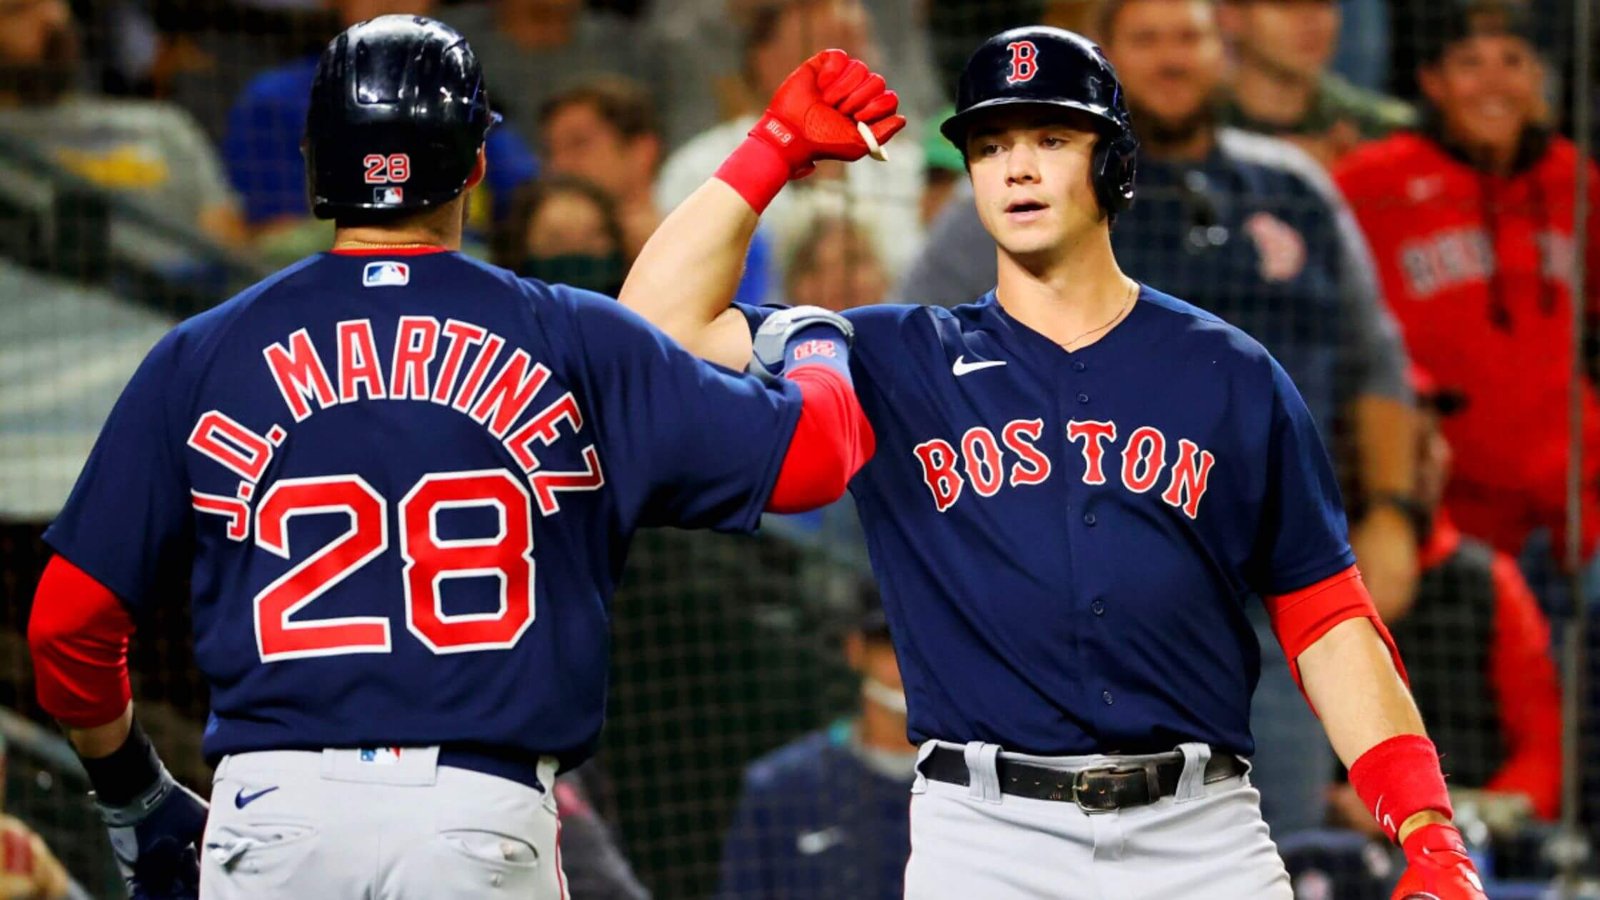 Boston Red Sox Beat Mariners 7-1 On The Road With Home Runs!